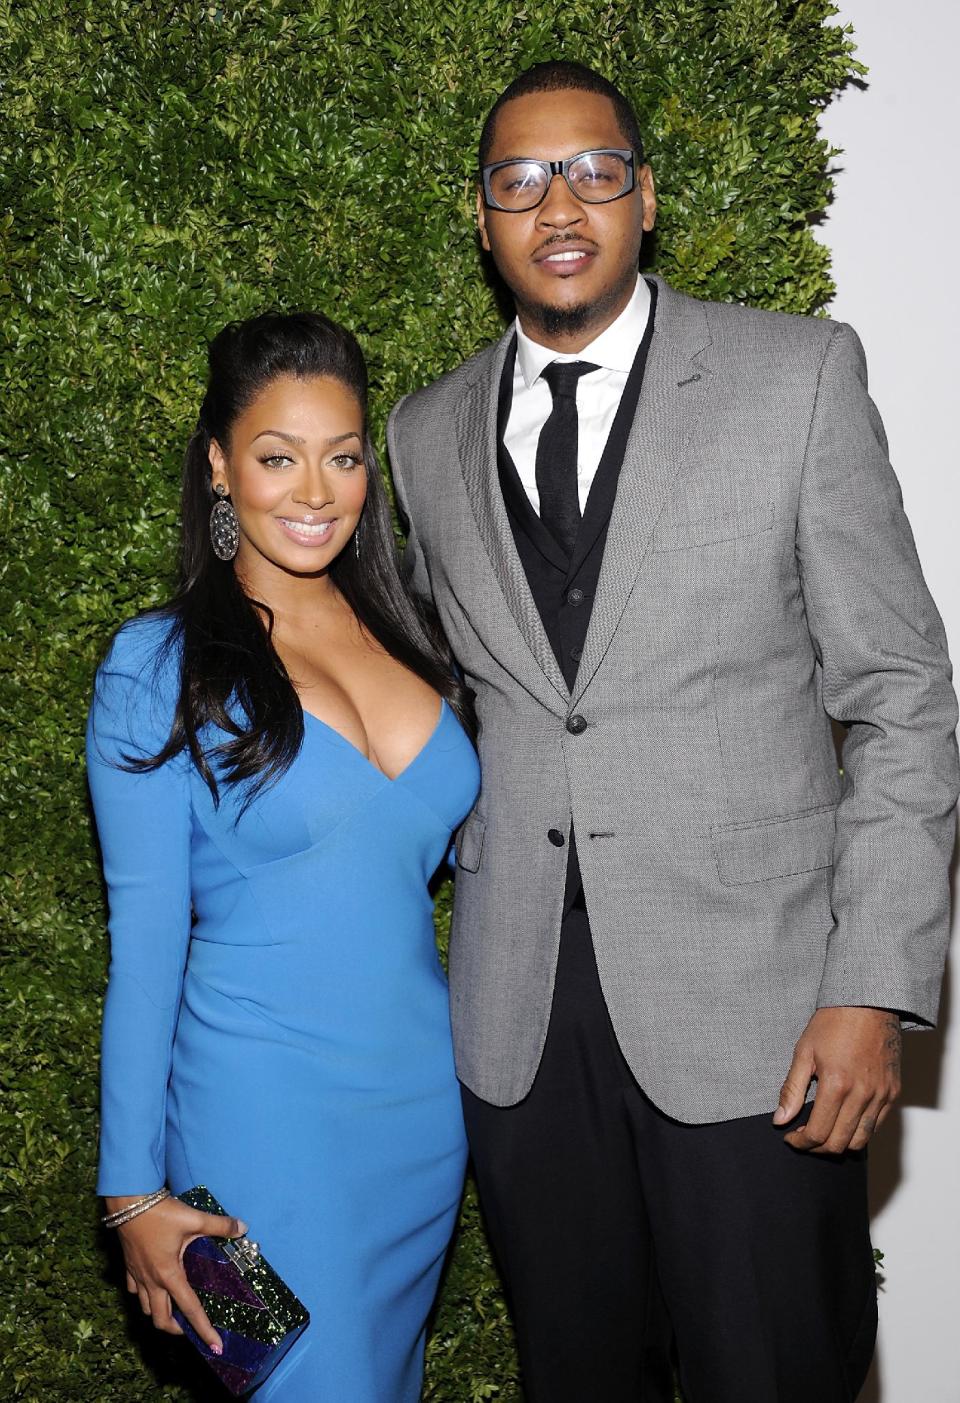 FILE - In this Nov. 14, 2011 file photo, LaLa Anthony, left and husband Carmelo Anthony attend the CFDA / Vogue Fashion Fund Awards at Skylight Soho in New York. Tall, trim and wearing catwalk clothes: Pro basketball stars have stepped up their style to become influential tastemakers. .Pro player style has been on the upswing for the past decade, especially since the NBA initiated a dress code in 2005, according to observers. (AP Photo/Evan Agostini, file)